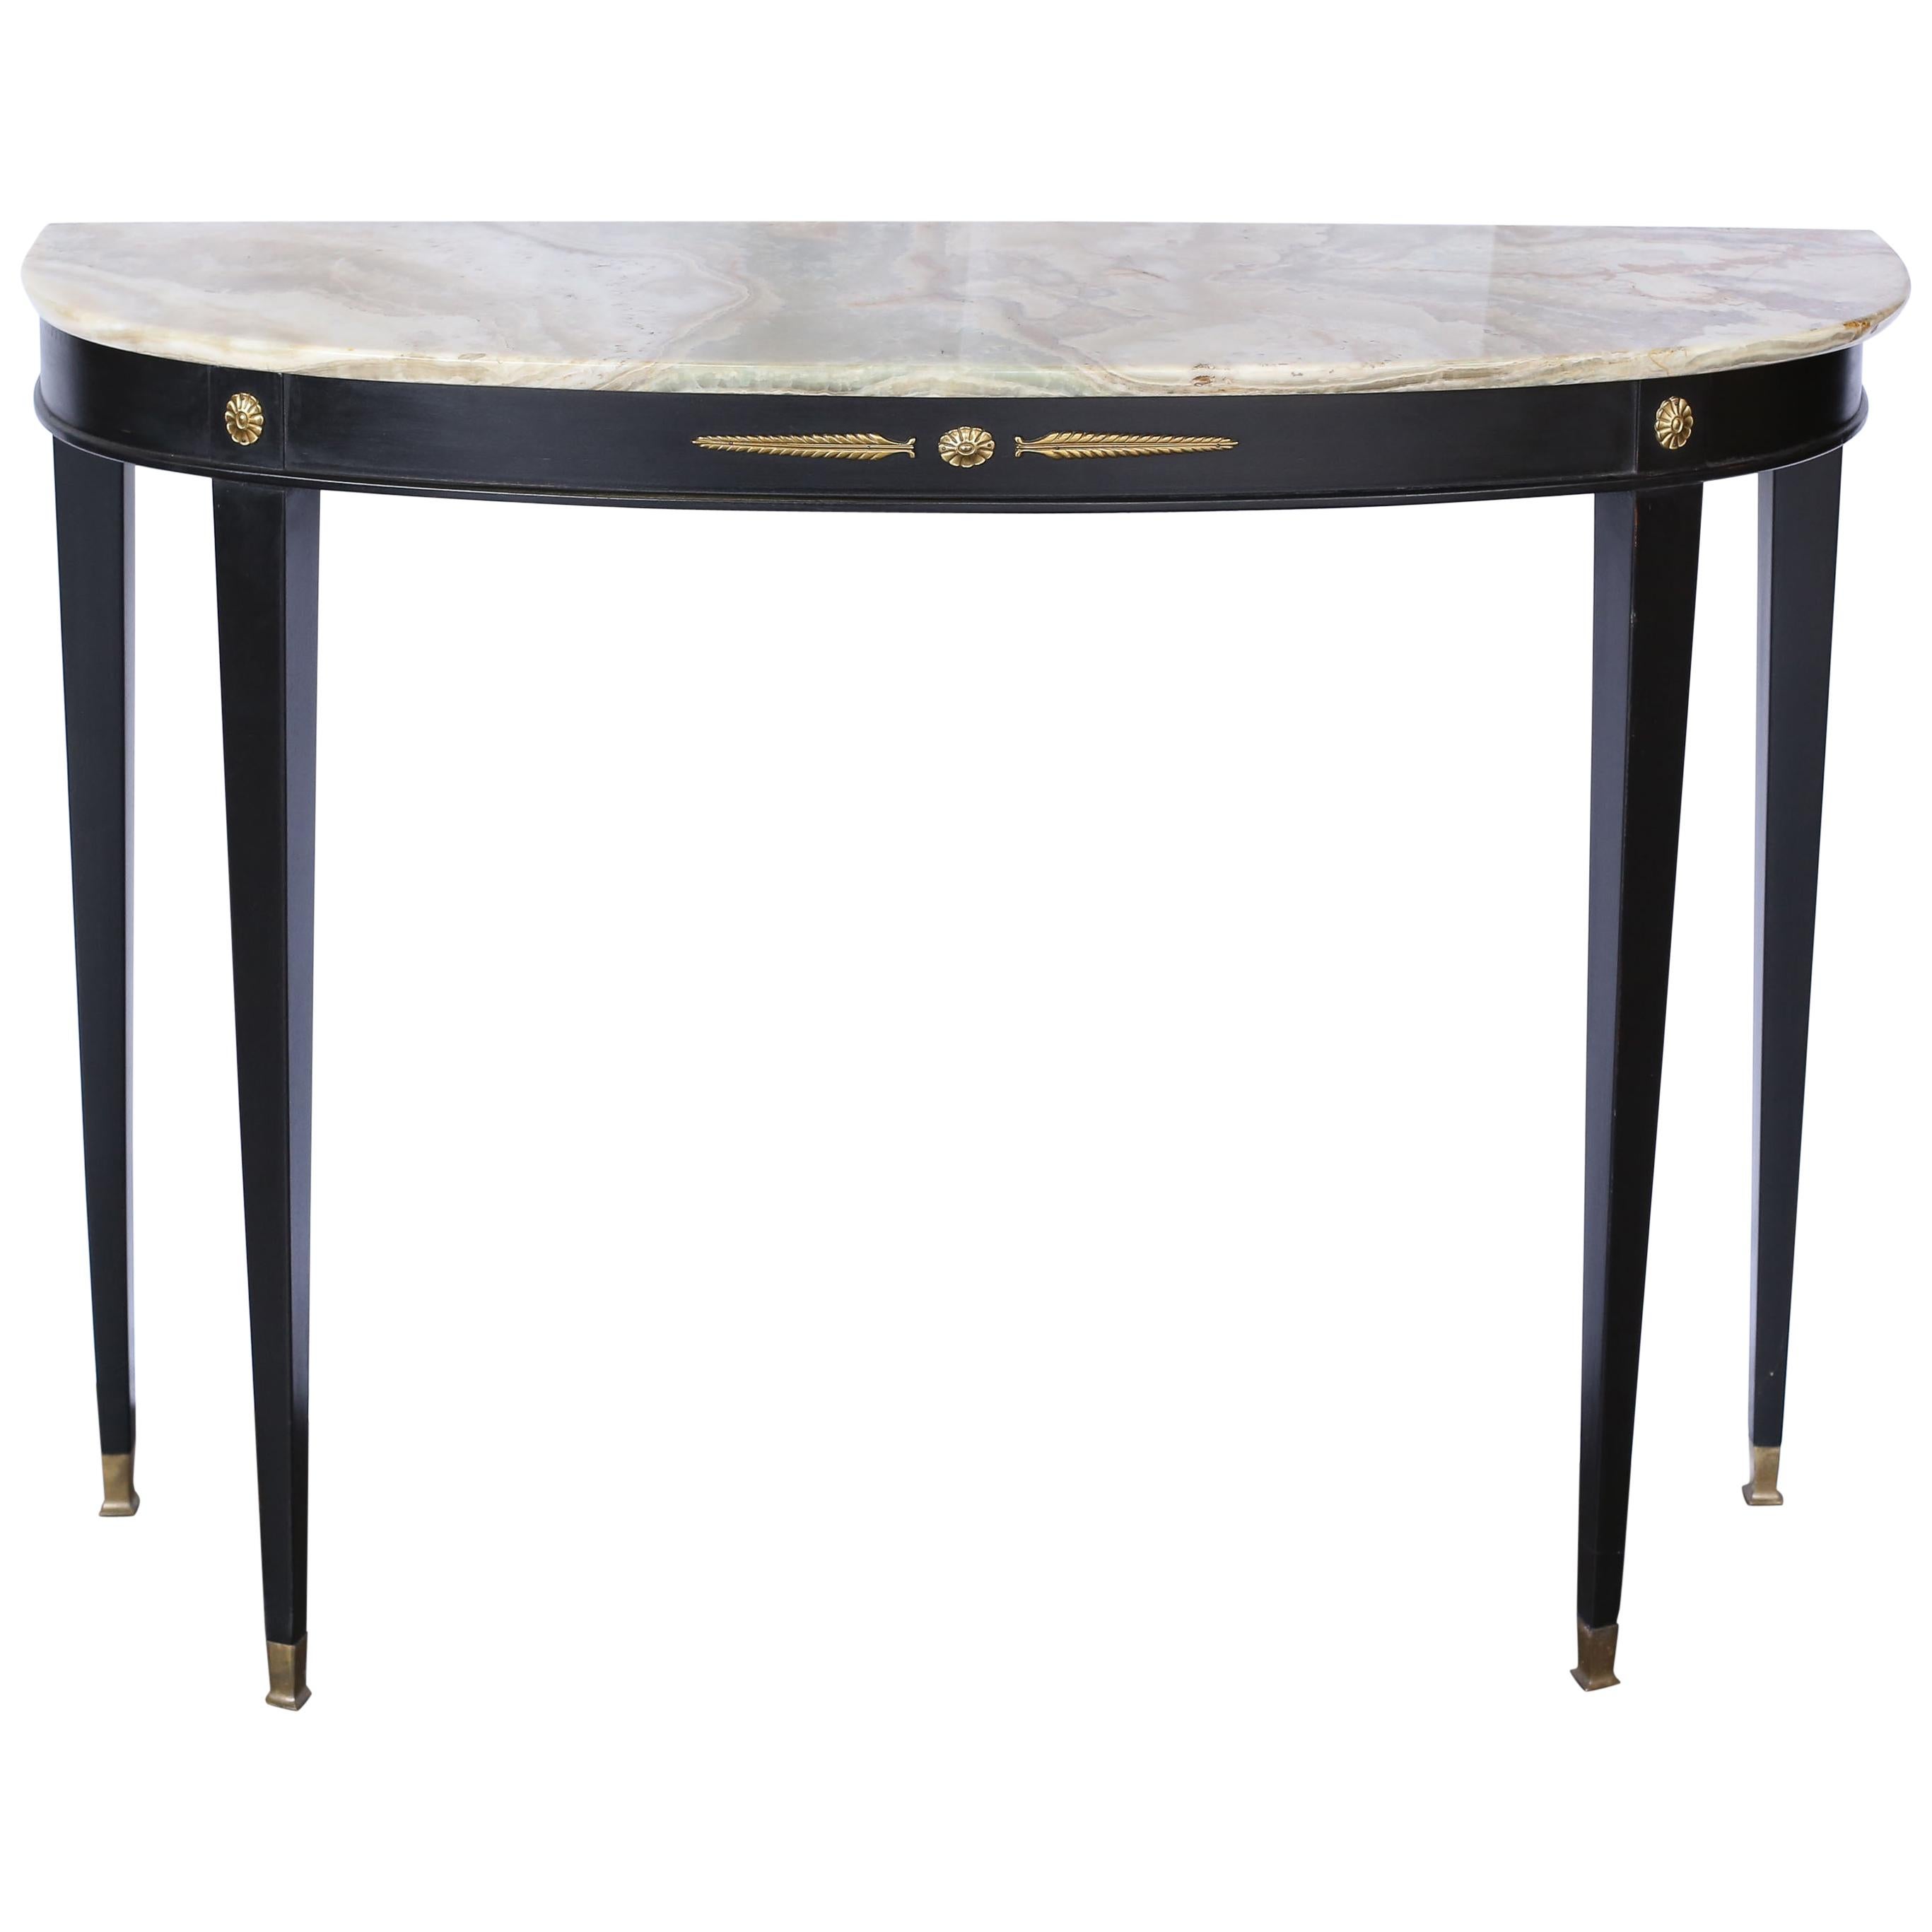 Beechwood Console with Marble Top